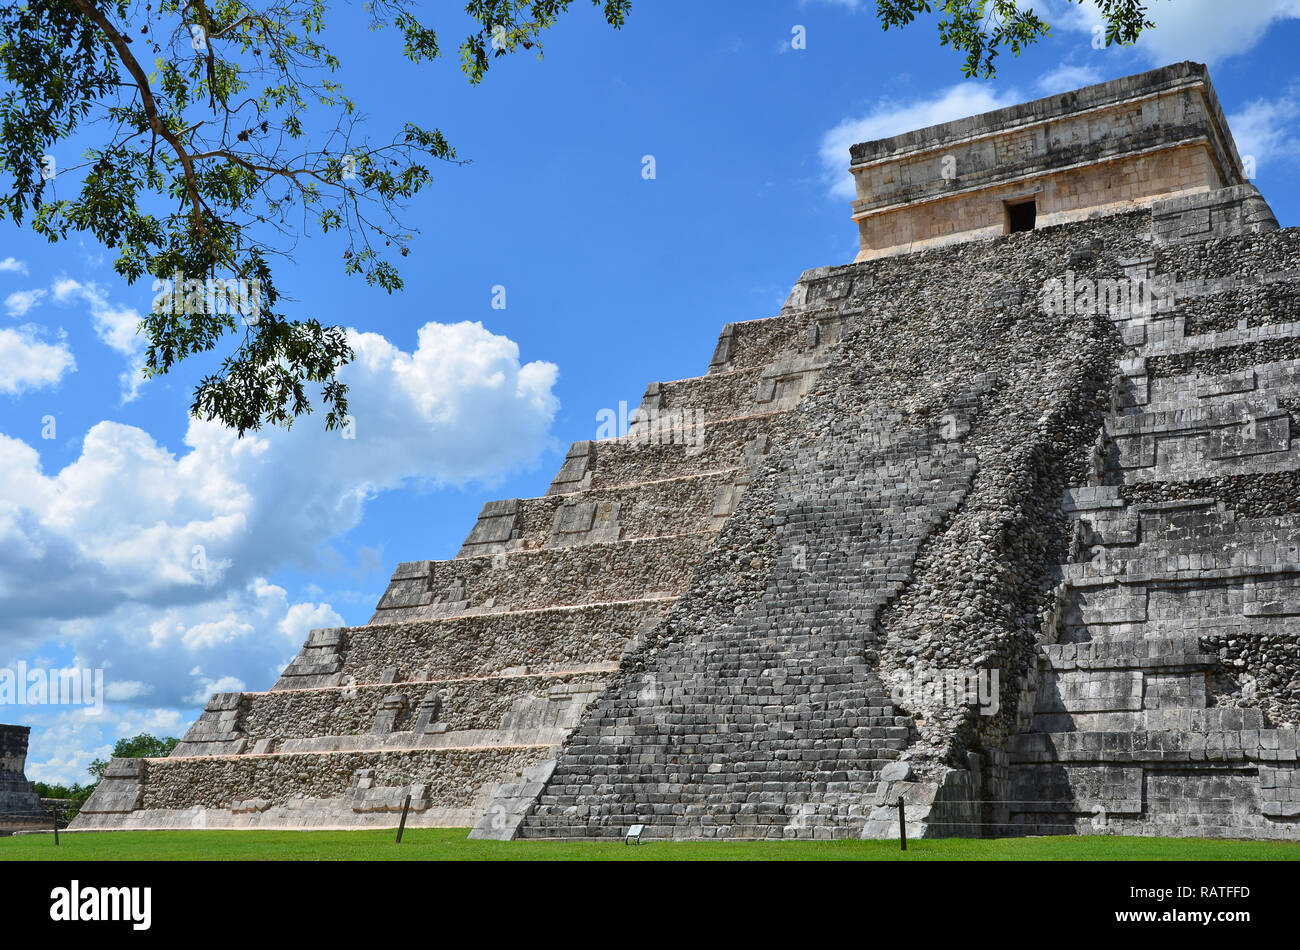 The Pyramid of Kukulkan at Chichen Itza in Mexico, one of the New Seven Wonders of the World. Stock Photo